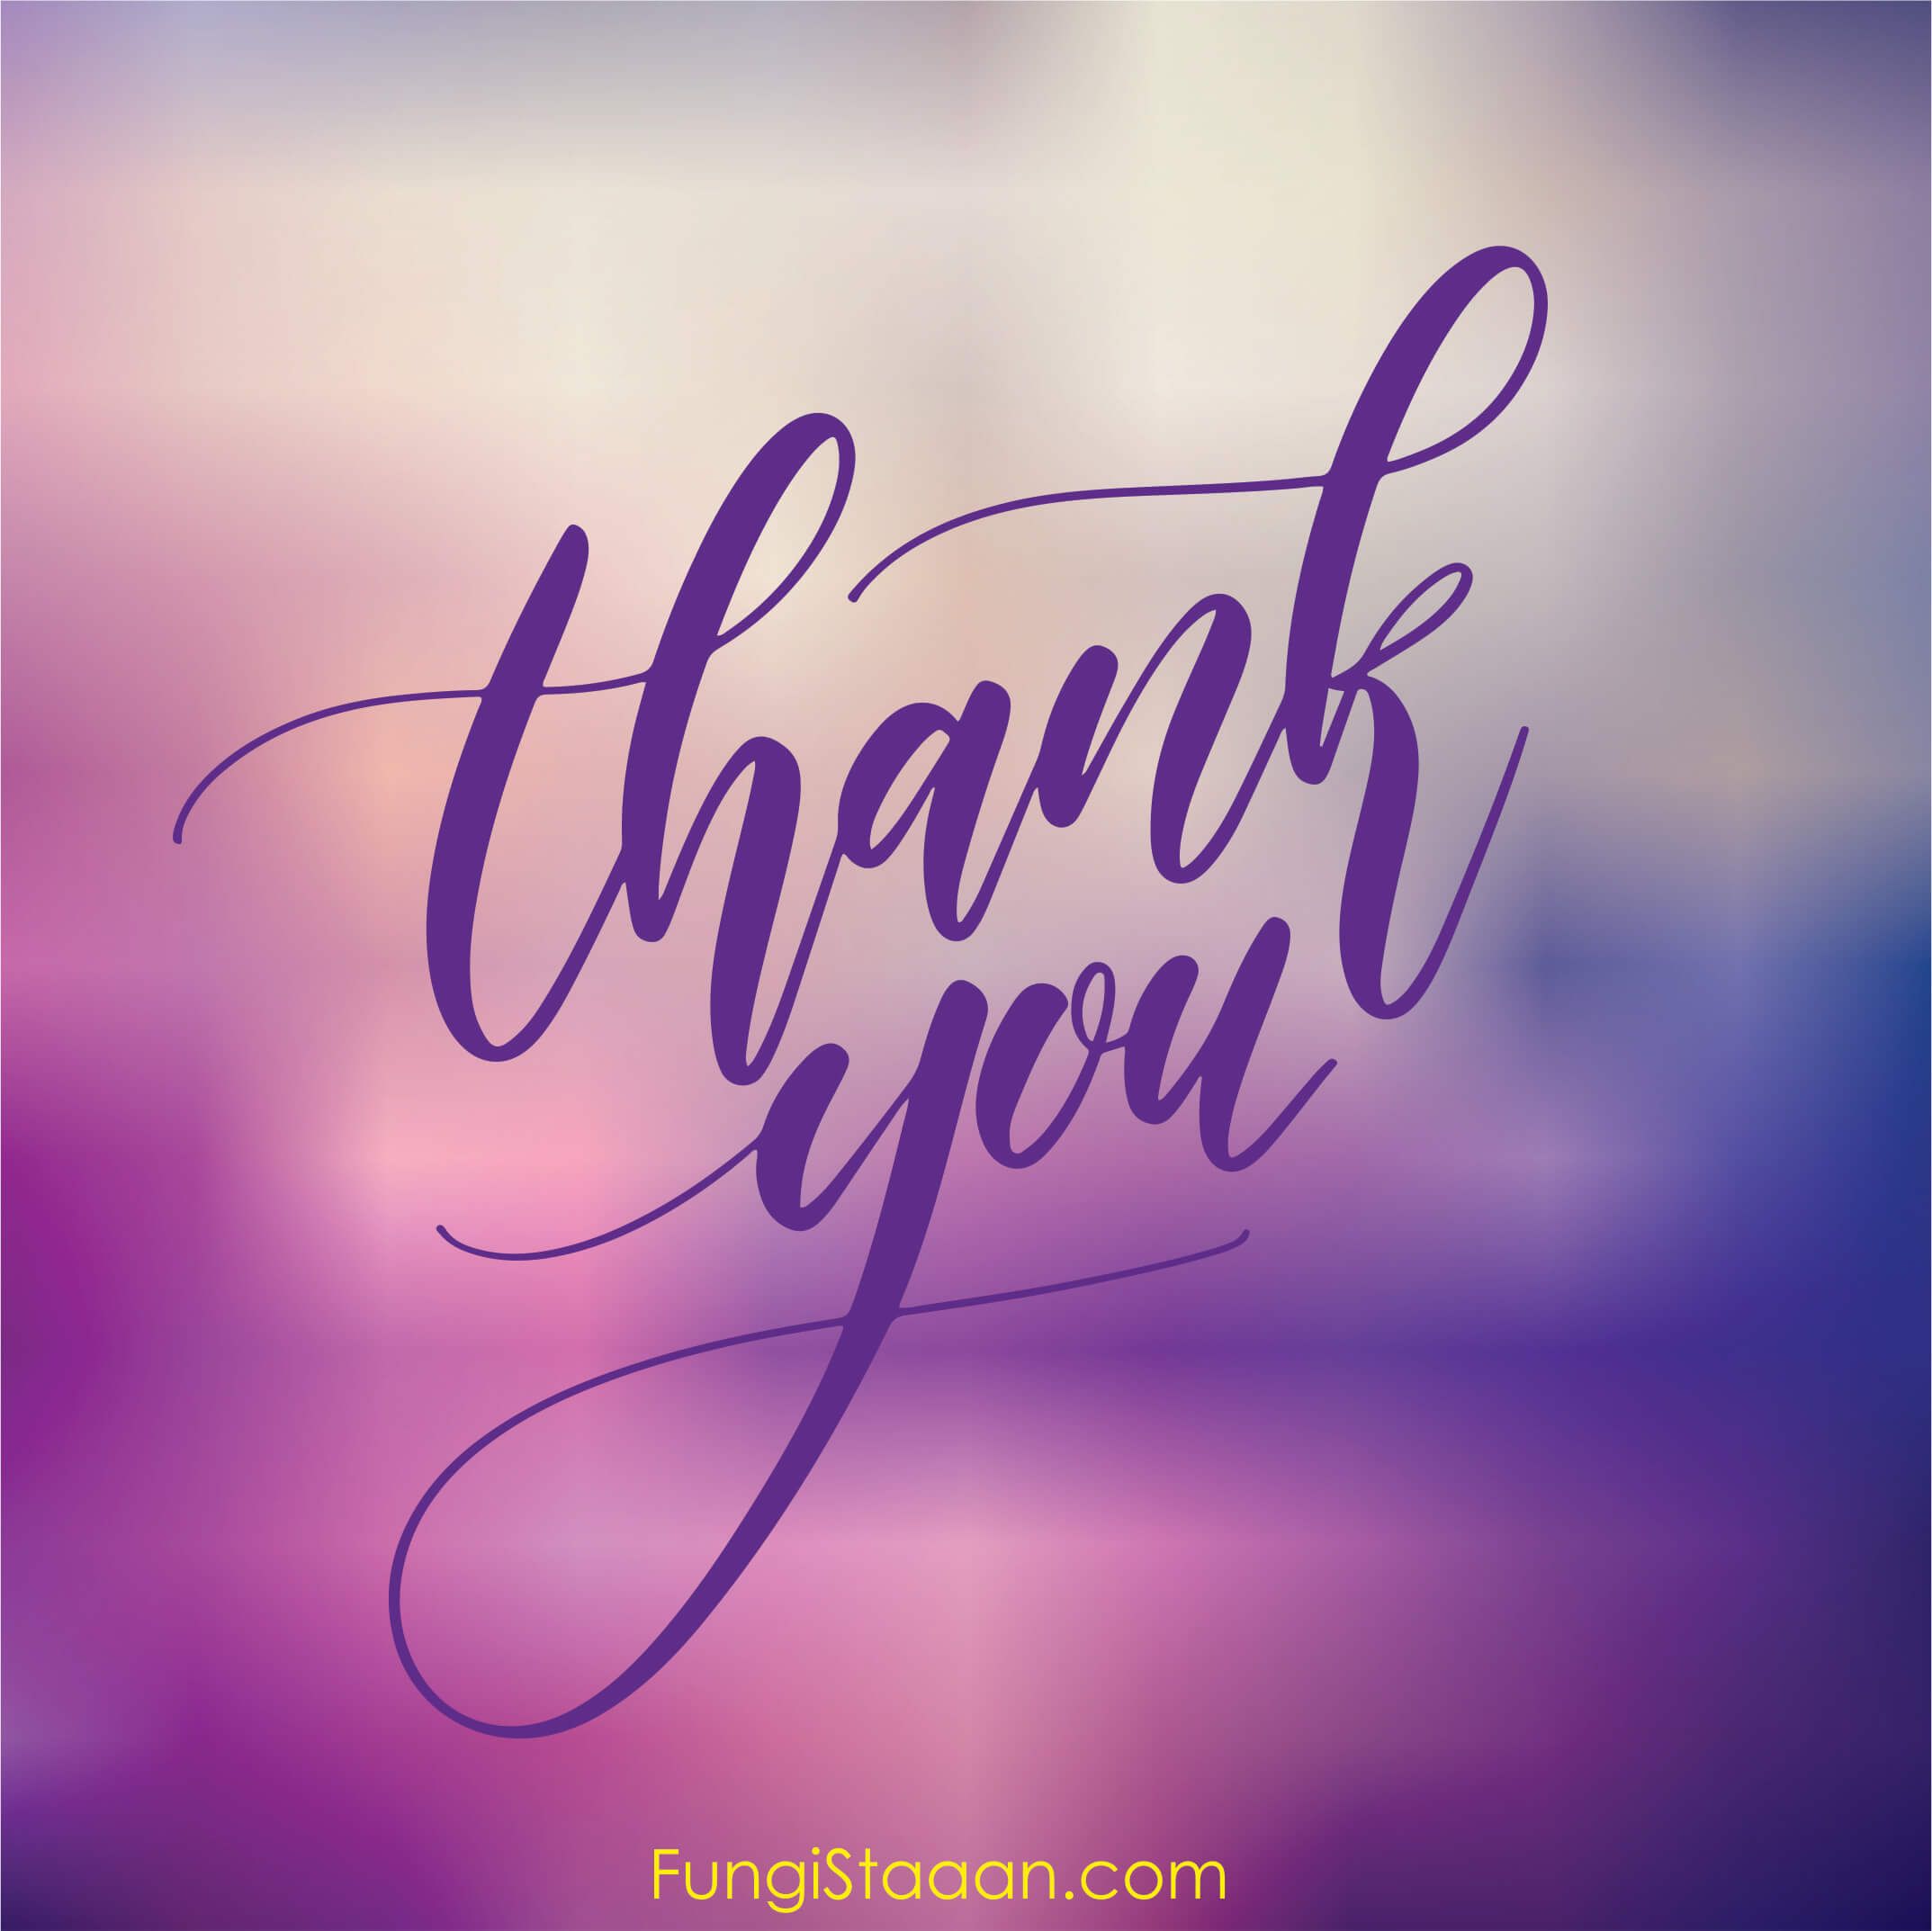 Best Thank You Image Pics ideas. thank you image, thank you, thank you quotes